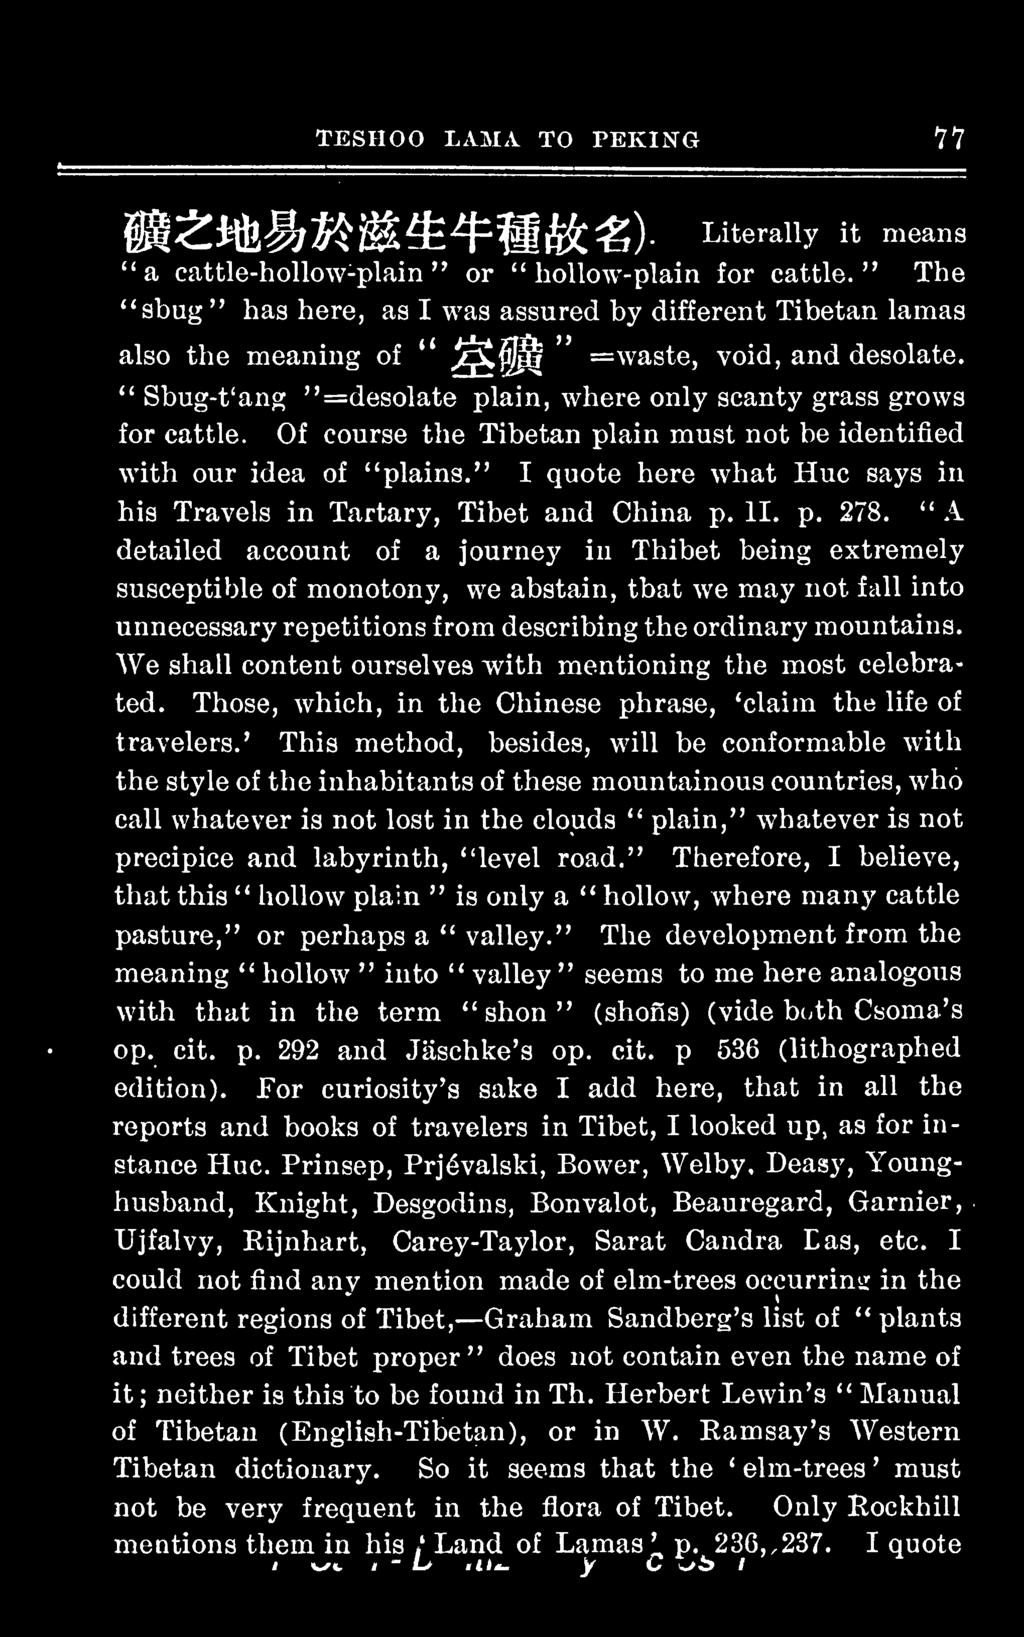 Of course the Tibetan plain must not be identified with our idea of "plains." I quote here what Hue says in his Travels in Tartary, Tibet and China p. II. p. 278.